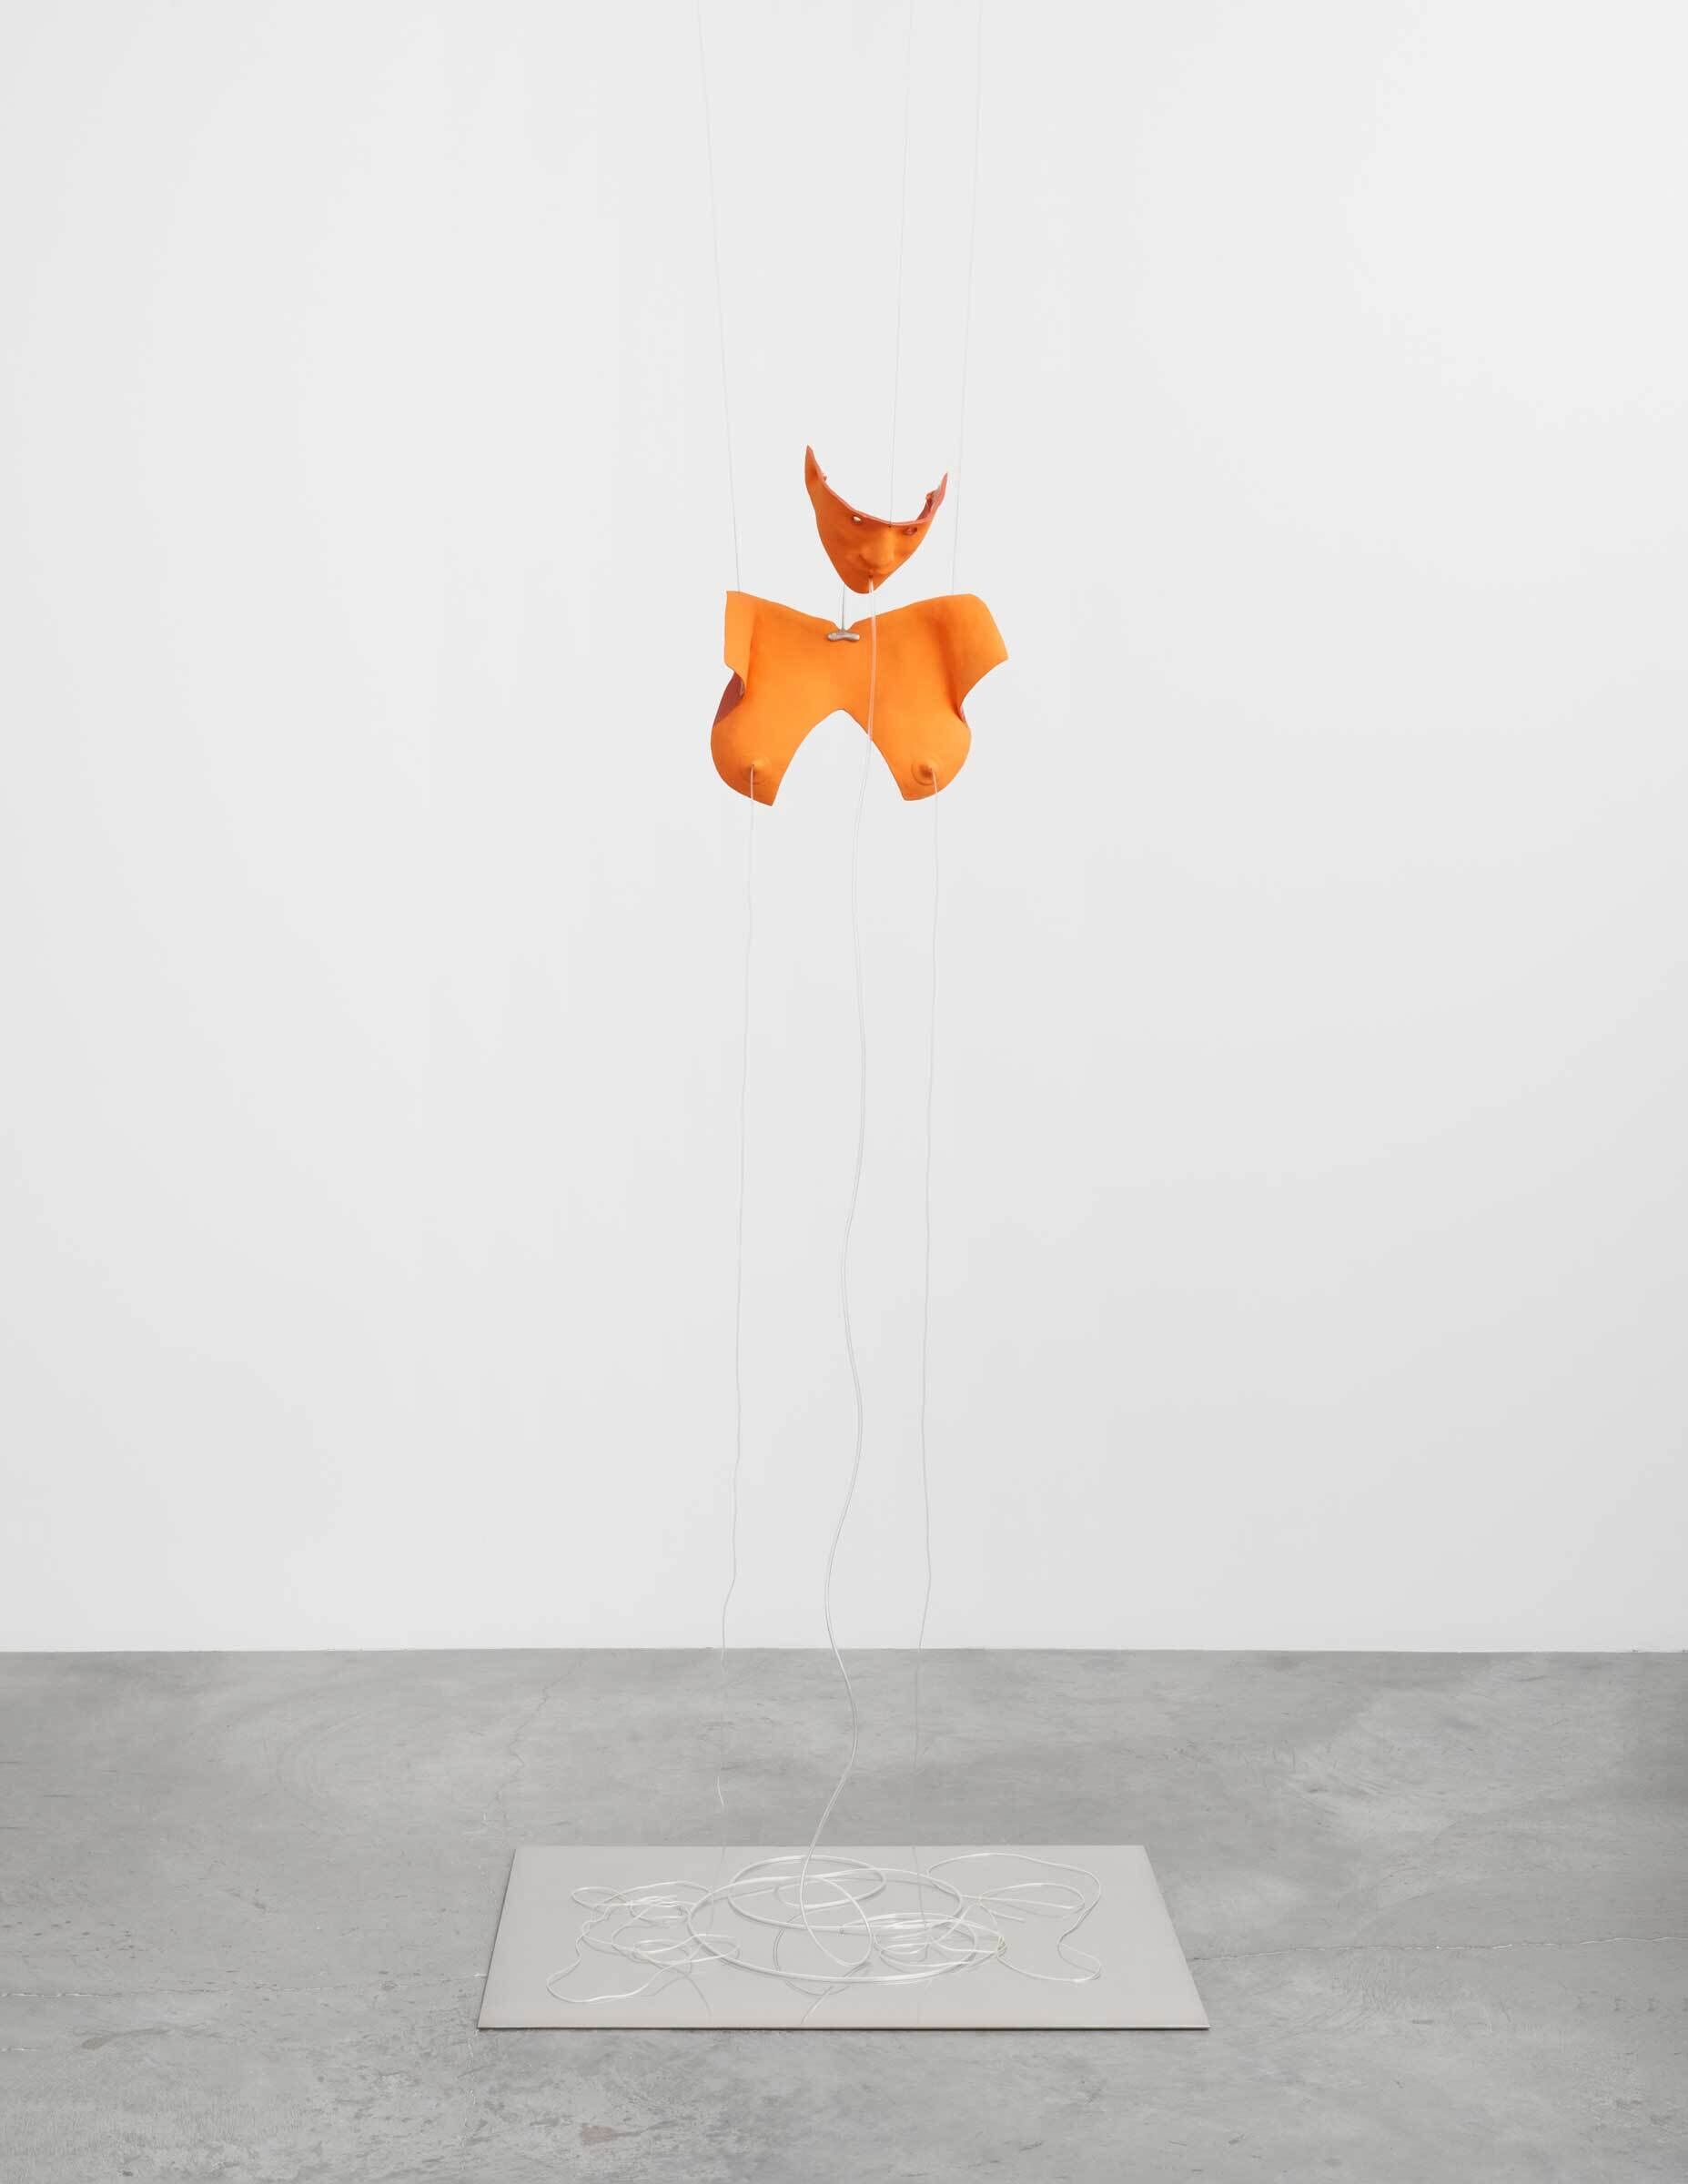 An orange abstract sculpture suspended by strings above a white outline on the floor in a minimalist setting.